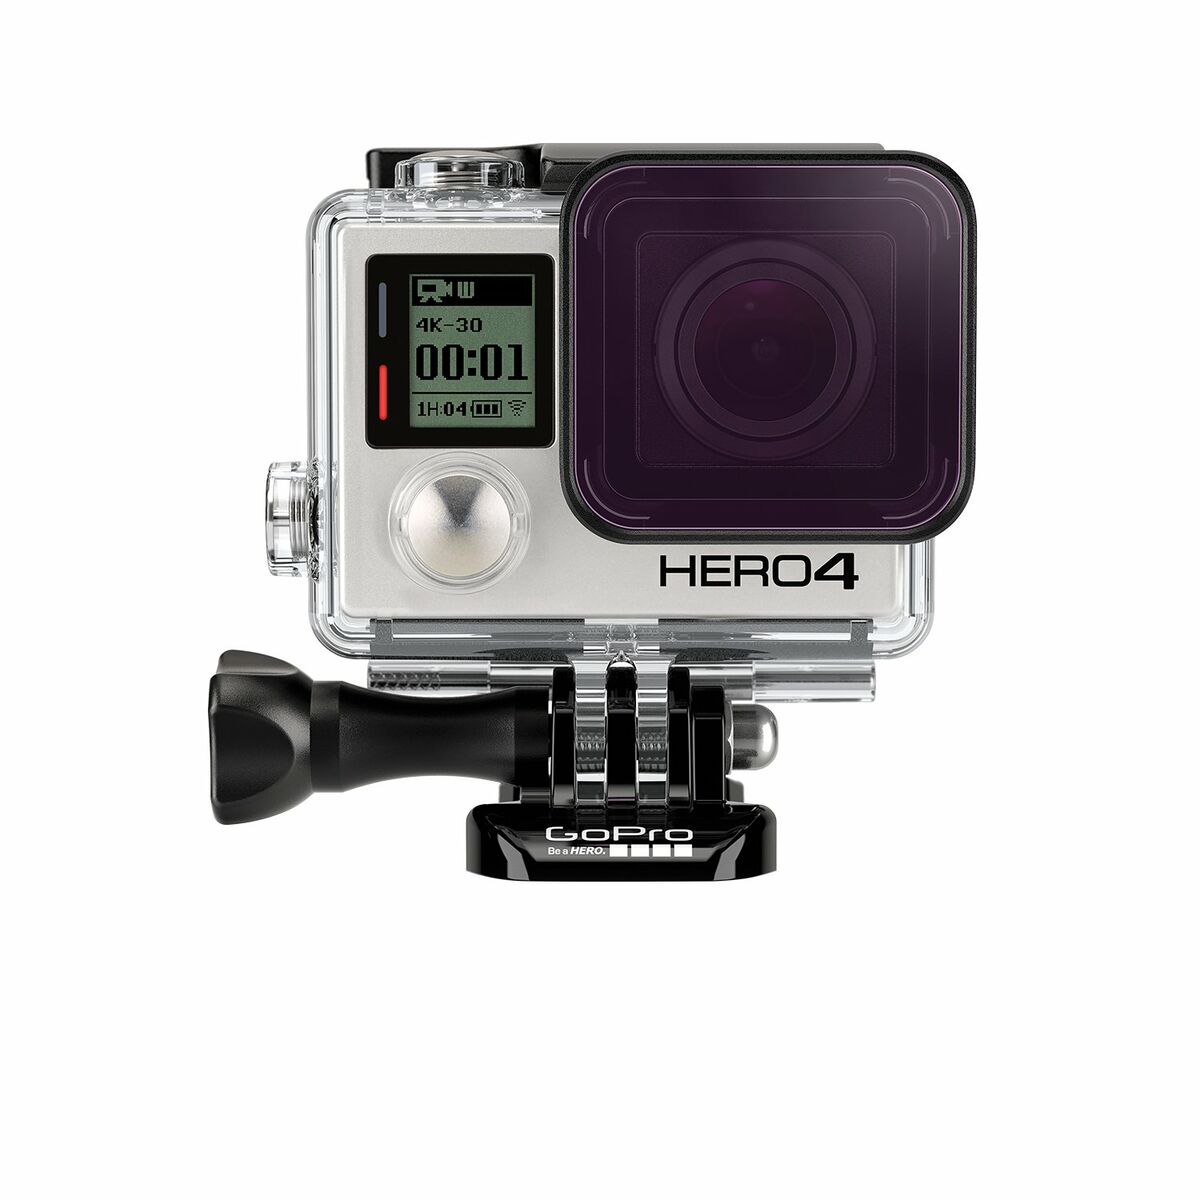 Filter GoPro ABDFM-301 Magenta, GoPro, Sports and outdoors, Electronics and devices, filter-gopro-abdfm-301-magenta, Brand_GoPro, category-reference-2609, category-reference-2614, category-reference-2932, category-reference-t-19756, category-reference-t-7034, category-reference-t-7048, cinema and television, Condition_NEW, deportista / en forma, fotografía, Price_50 - 100, travel, RiotNook